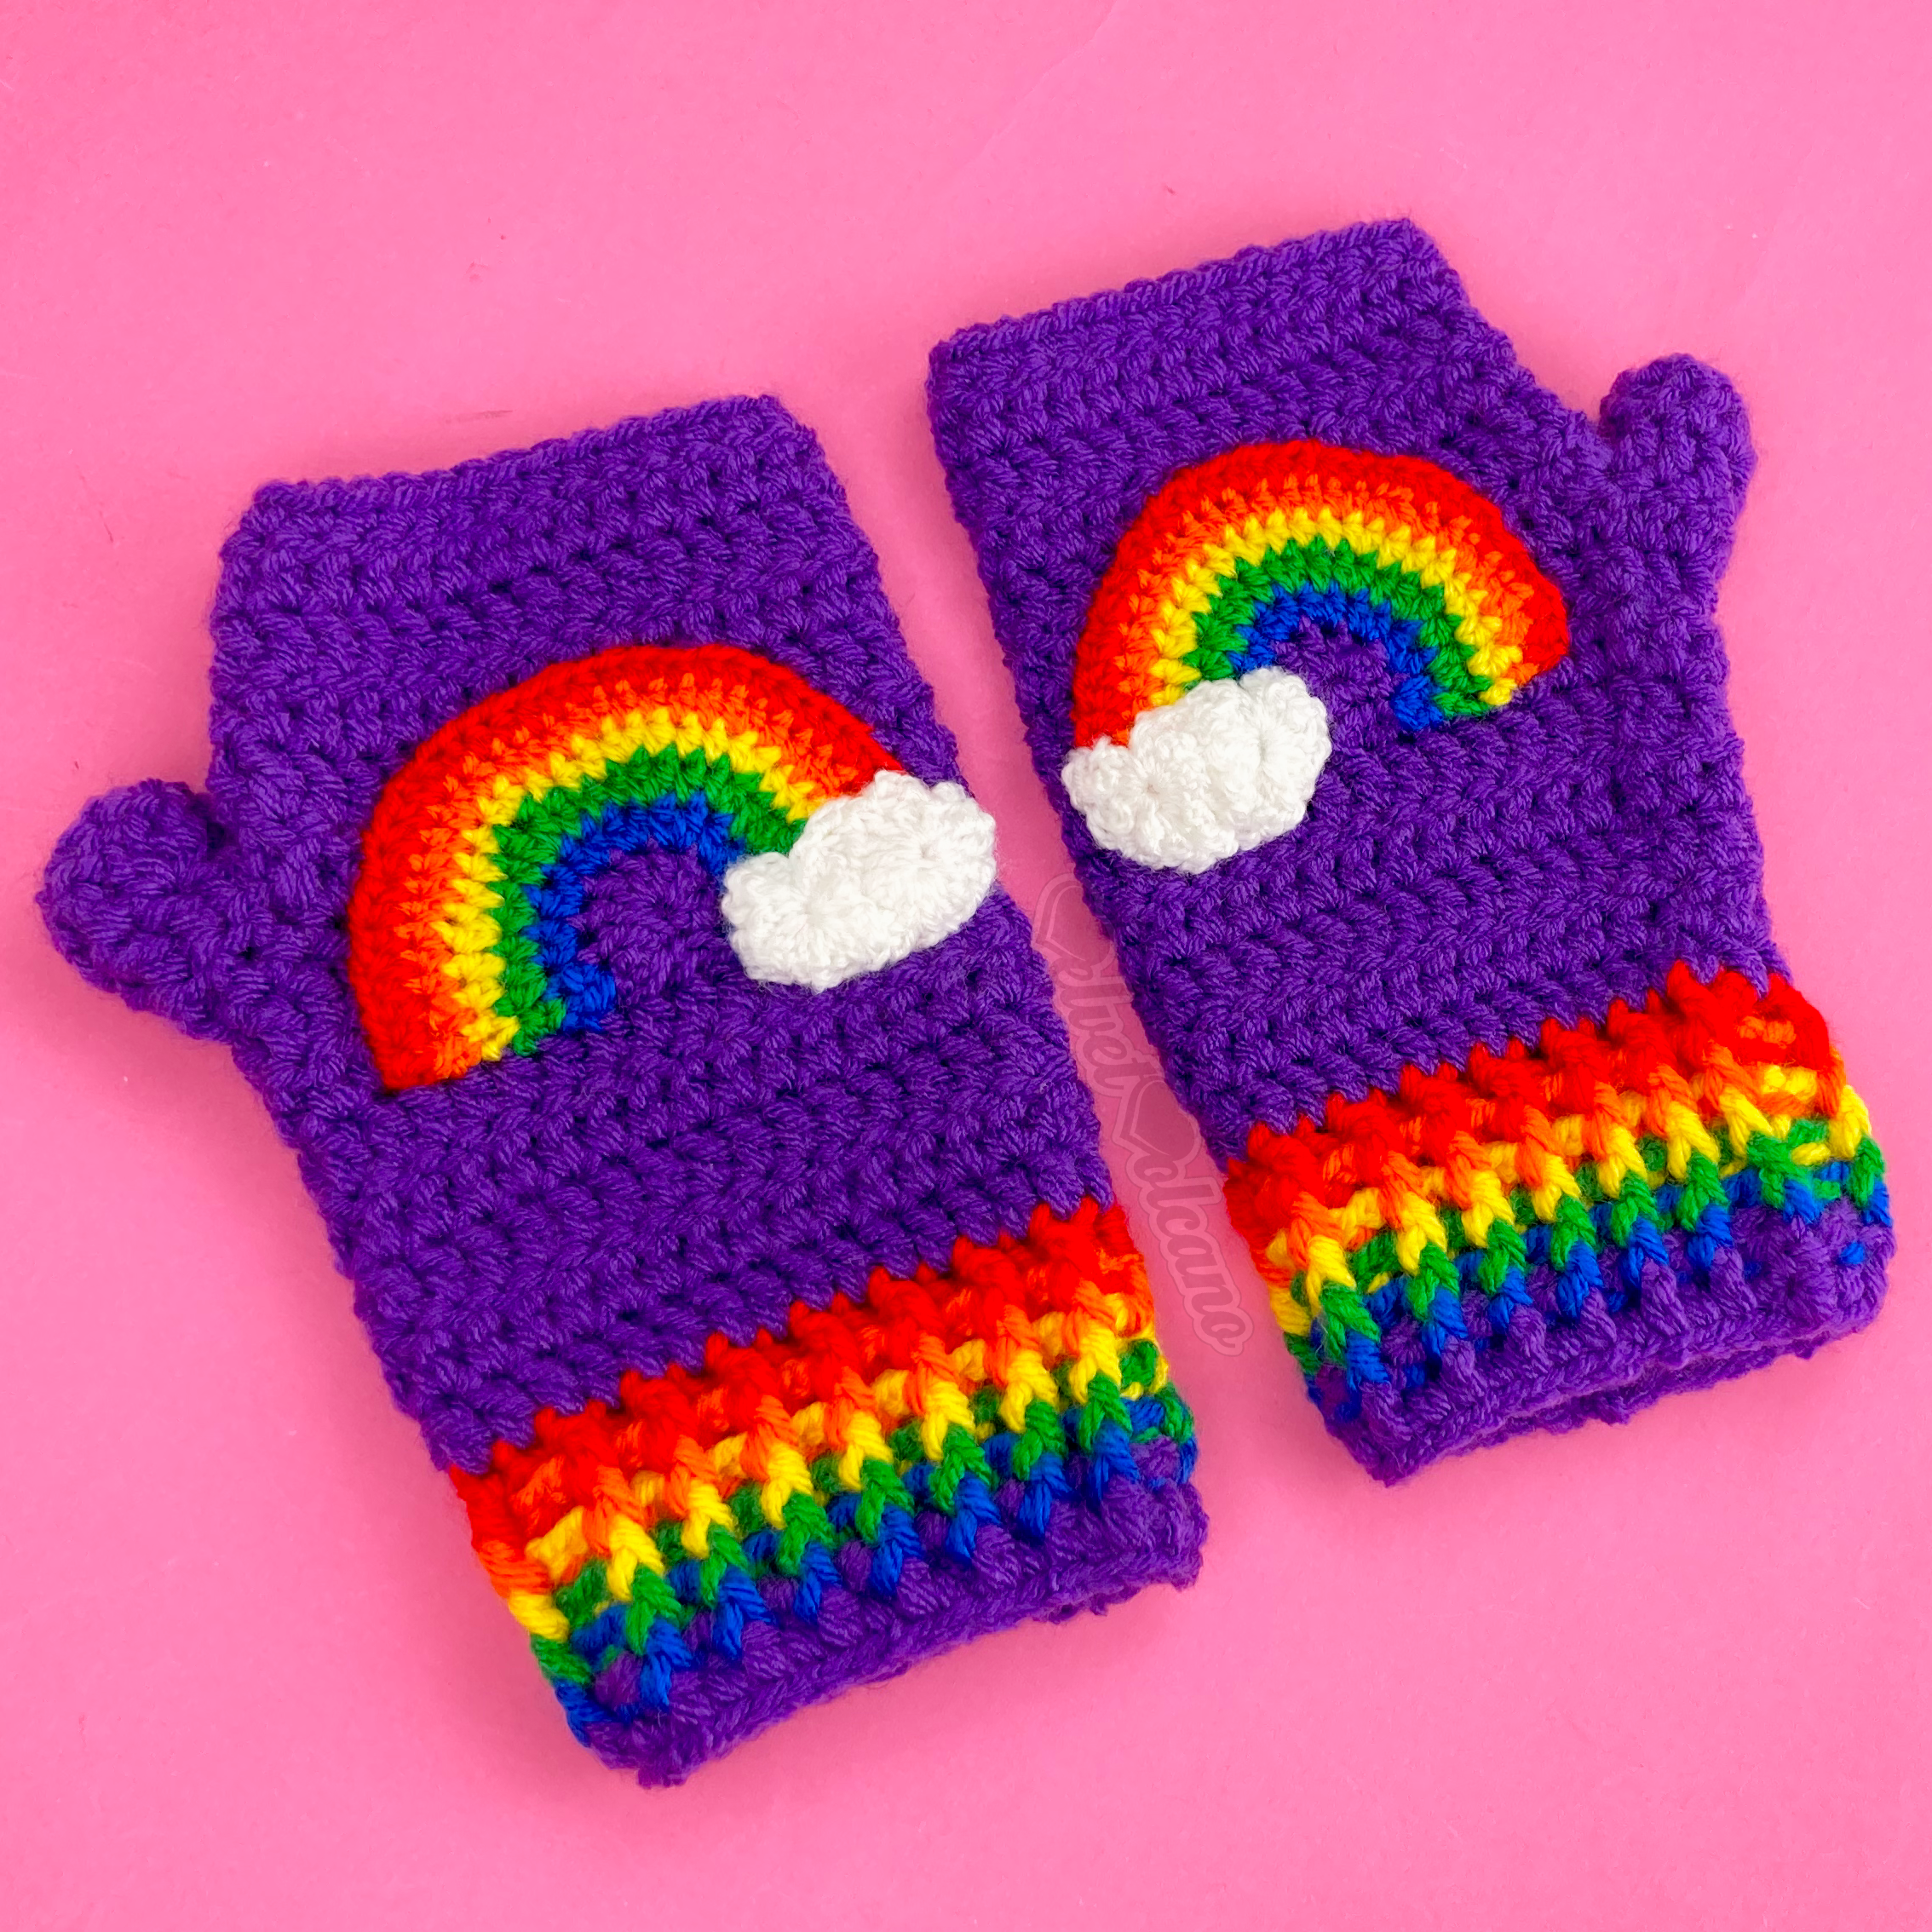 A purple pair of crocheted fingerless gloves with a rainbow striped cuff and a rainbow applique on the front of each glove that has a white cloud on one end of the rainbow.